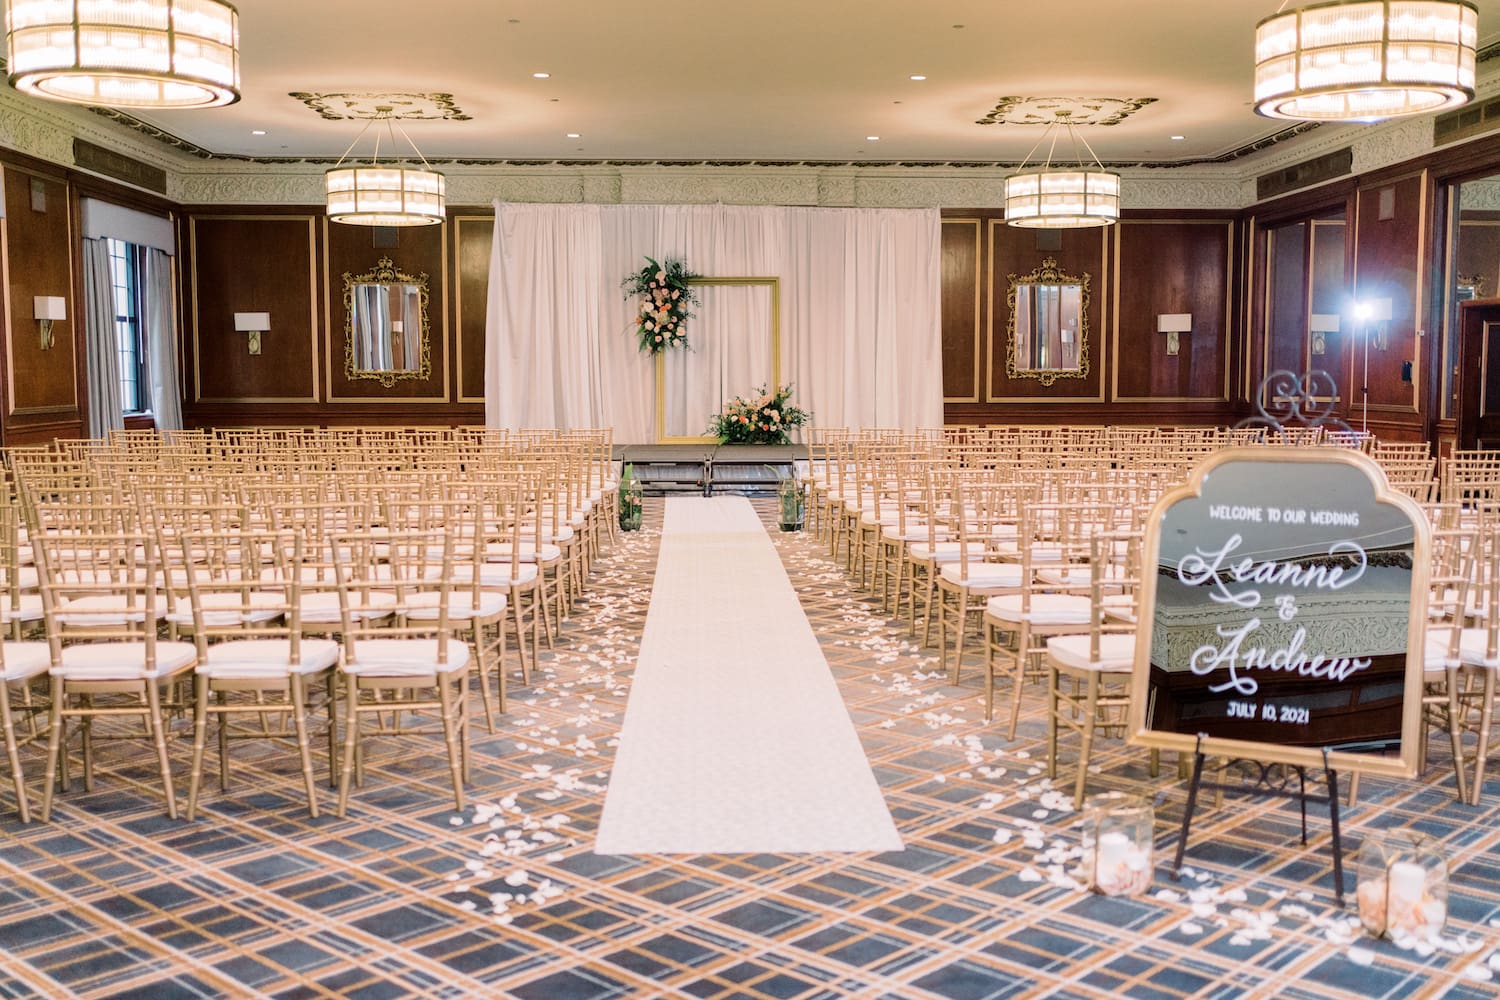 Ceremony space at the Fairmont Copley with a white aisle, white chairs, a wedding arch with white backdrop and a wedding sign that reads Leanne & Andrew